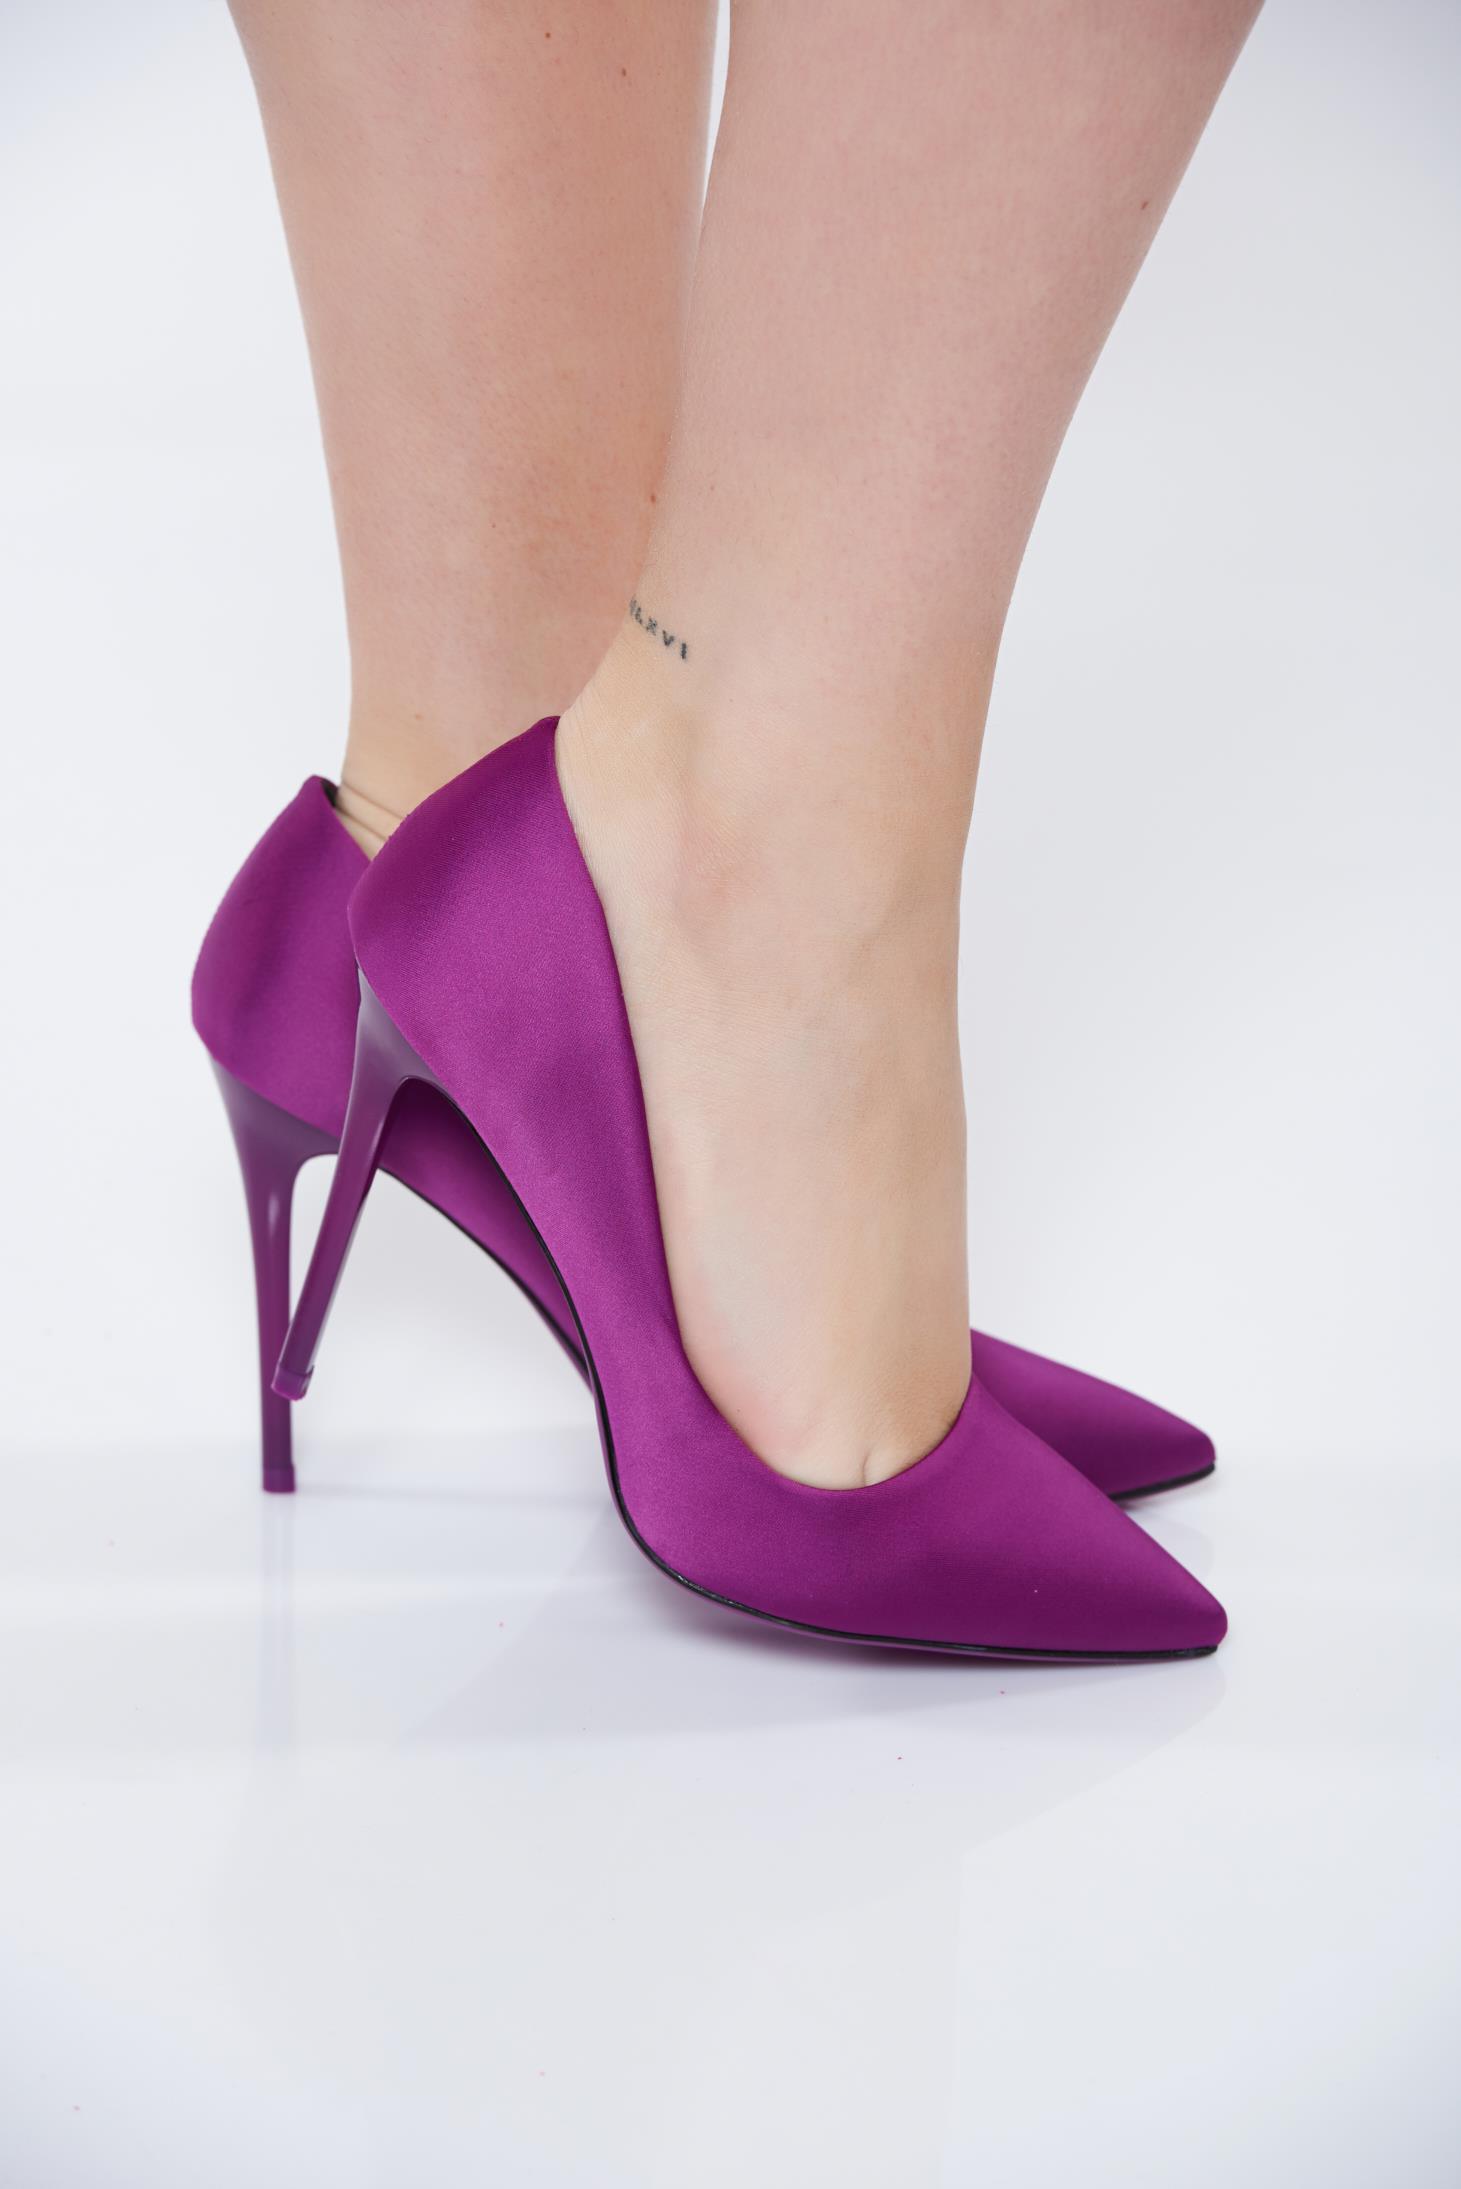 ecological leather stiletto with high heels